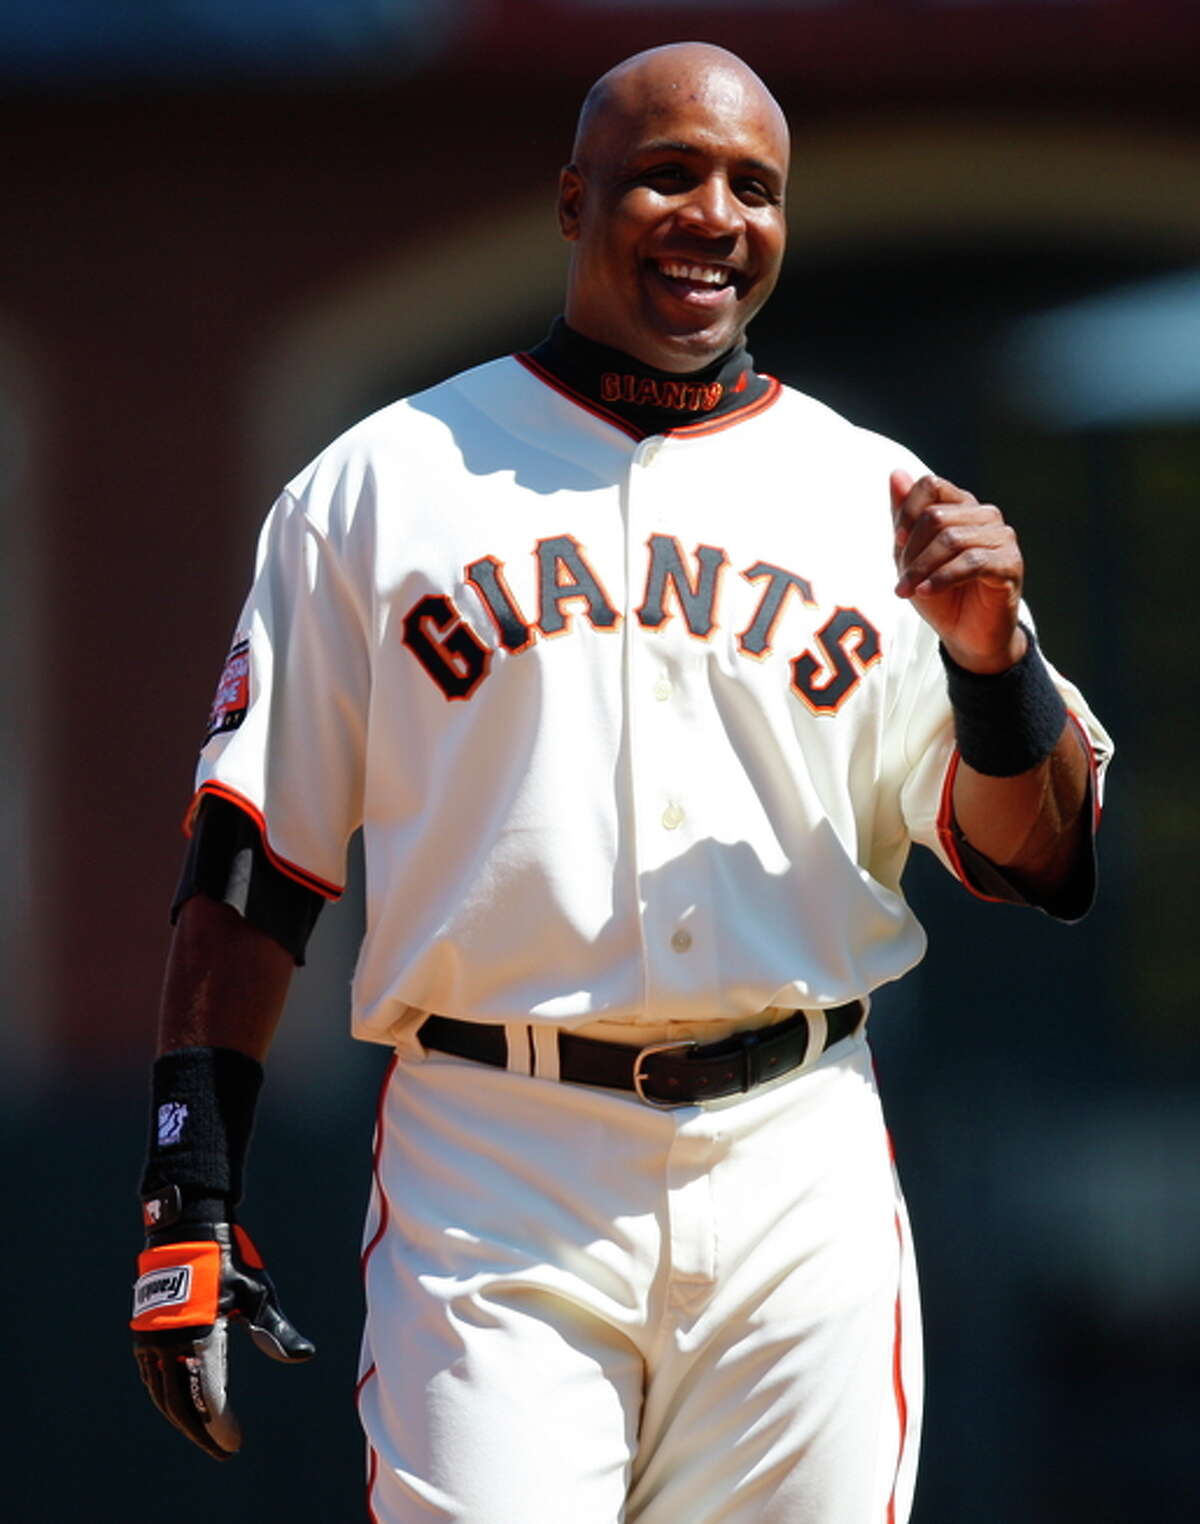 Barry Bonds among 5 in Bay Area Sports Hall of Fame class